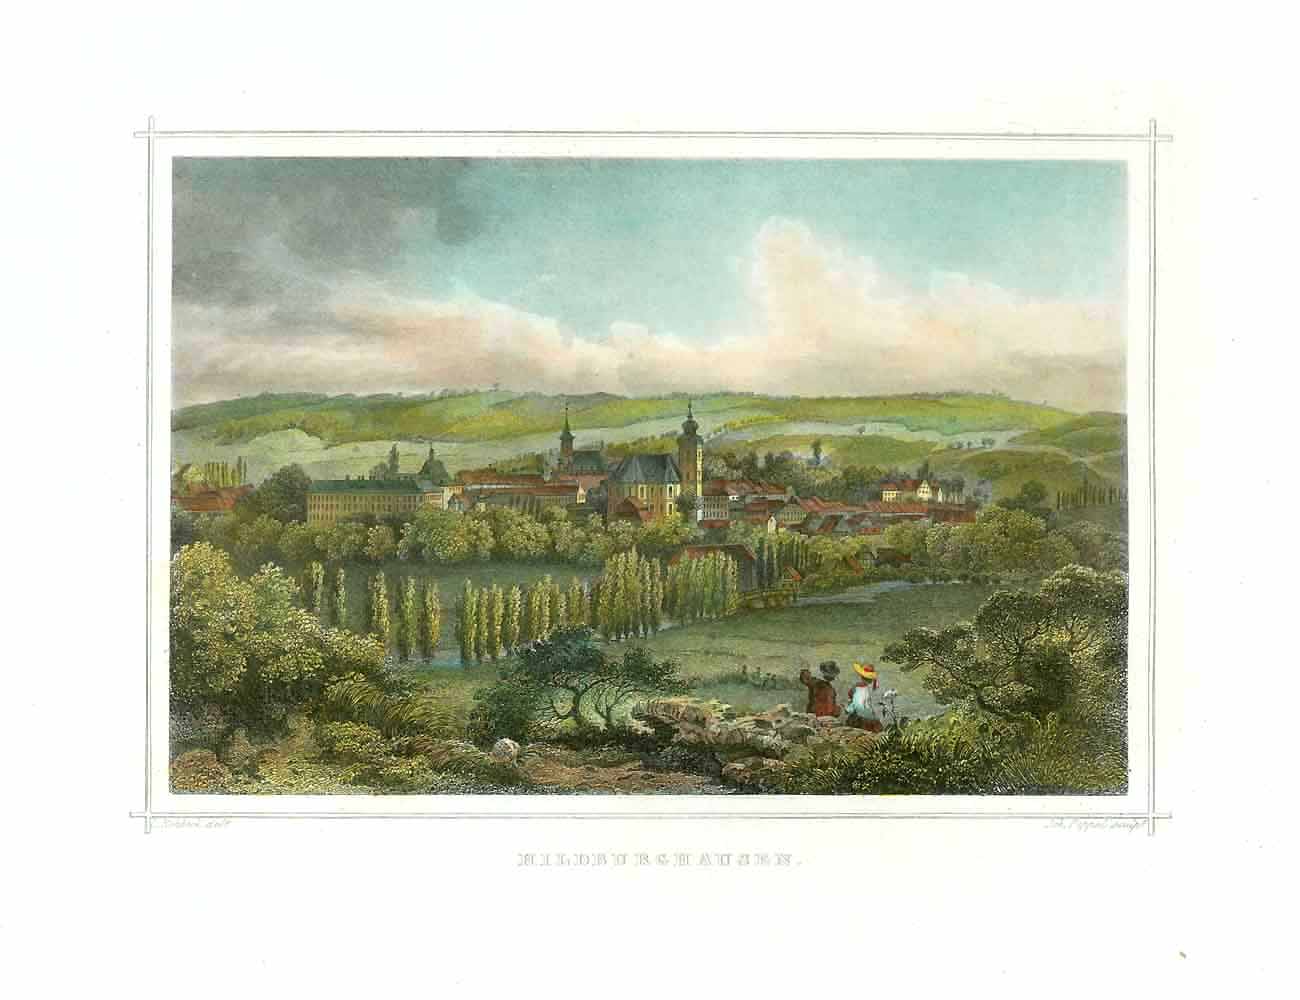 "Hildburghausen"  Steel engraving by Poppel after Rohbock ca 1850.  Attractive hand coloring. Wide margins.